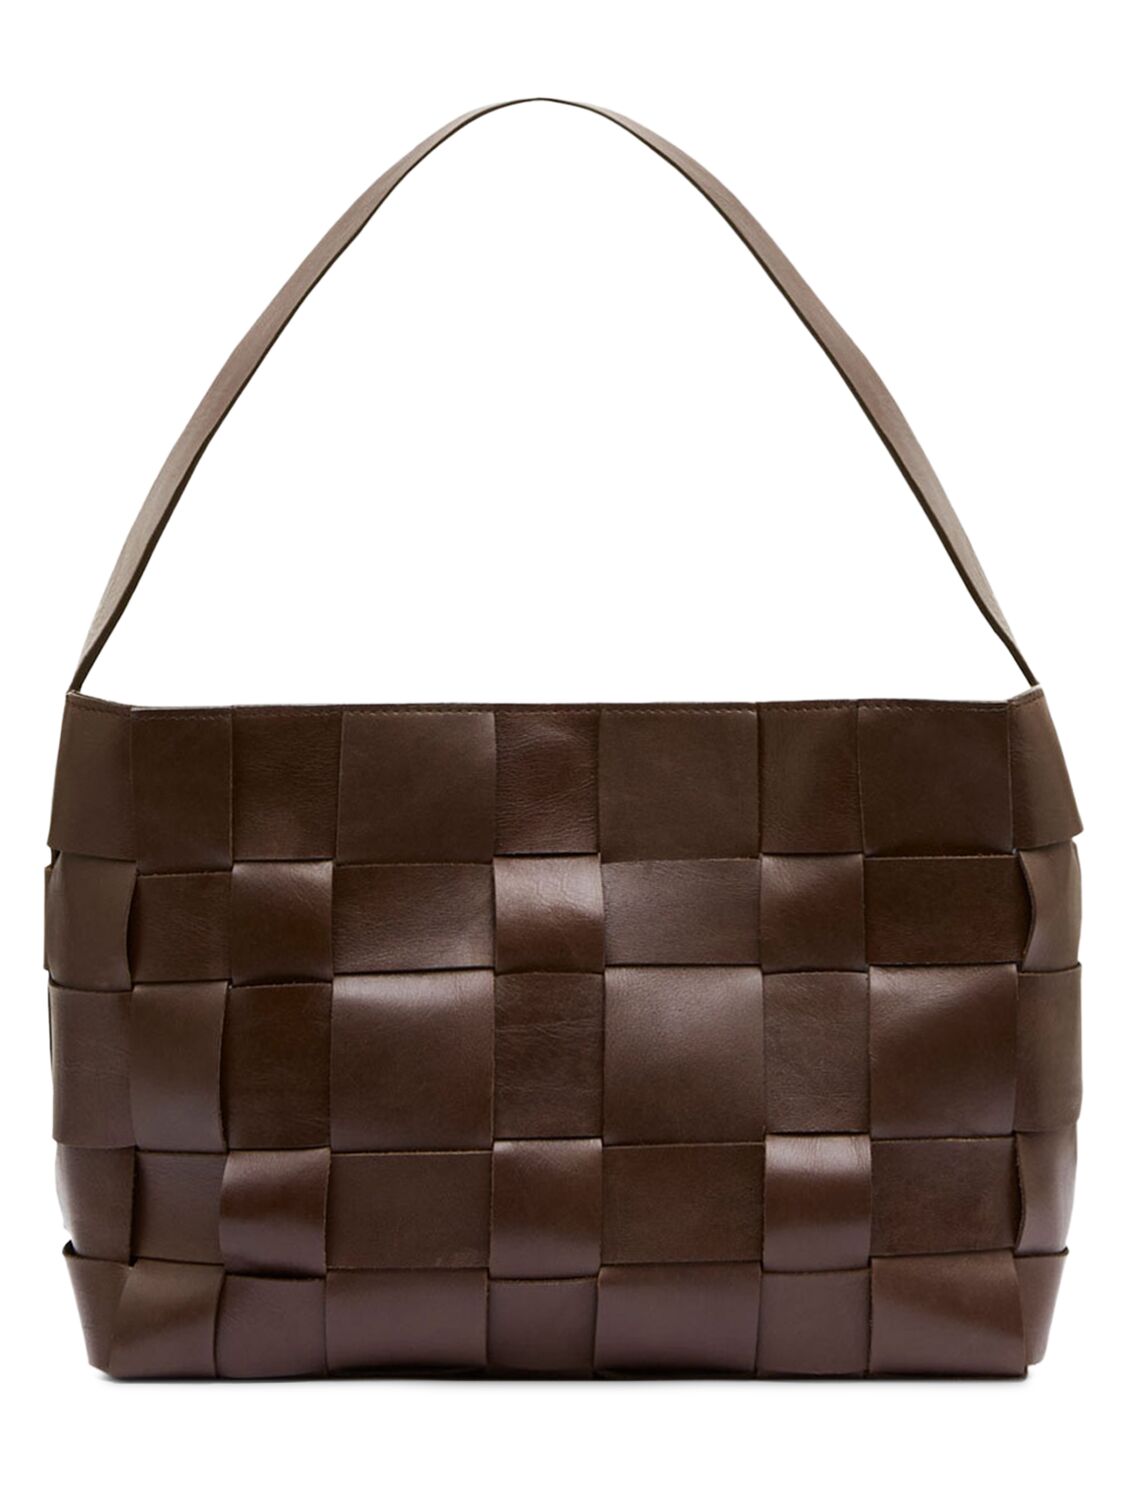 St.agni Mini Woven Leather Shoulder Bag In Chocolate